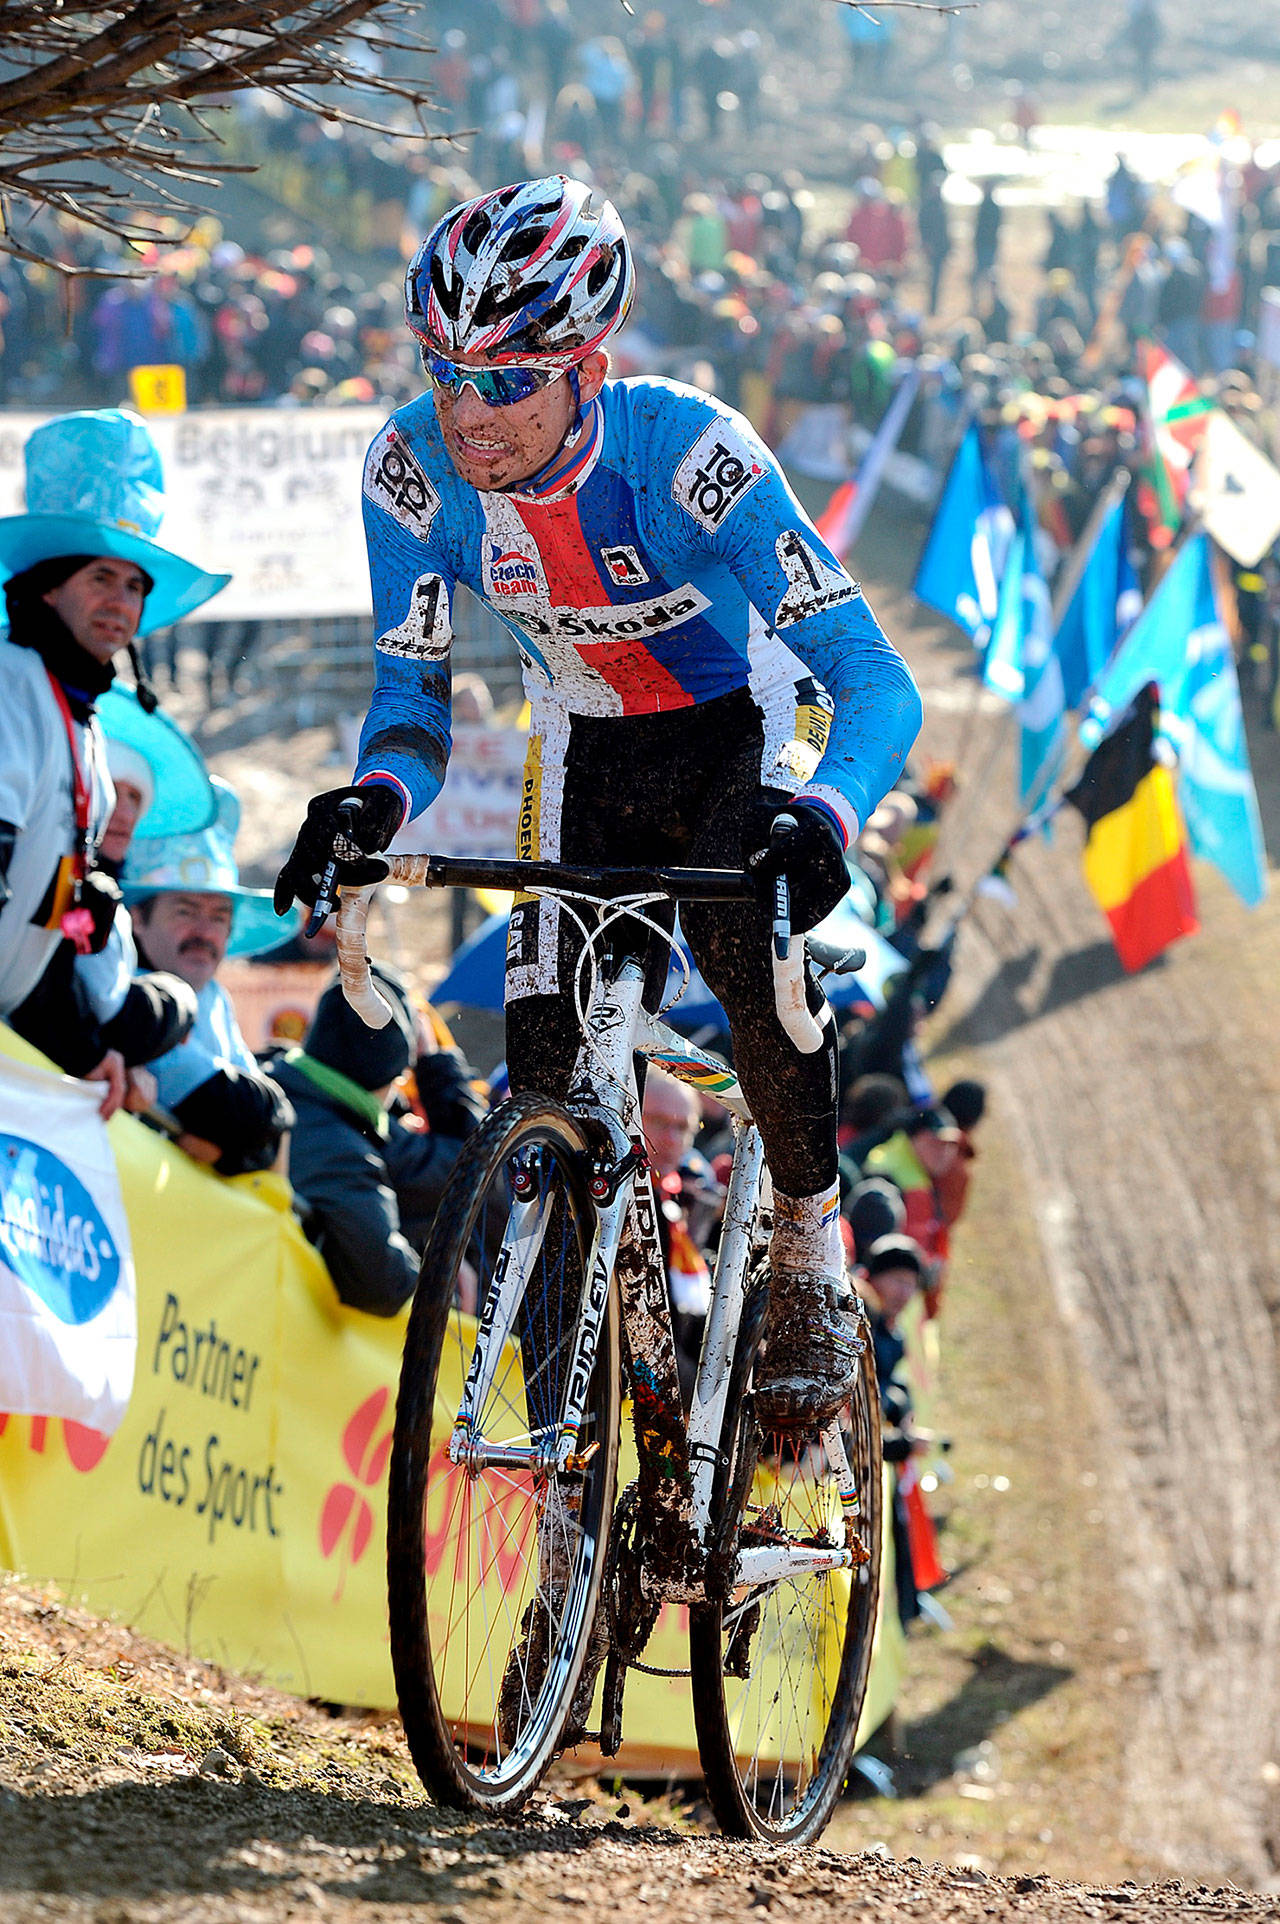 Harald Tittel/The Associated Press The sport of Cyclocross is coming to the Olympic Peninsula with a CycloX event set in late March at the Extreme Sports Park outside of Port Angeles. This is the World Cyclocross Championships in Germany in 2011.